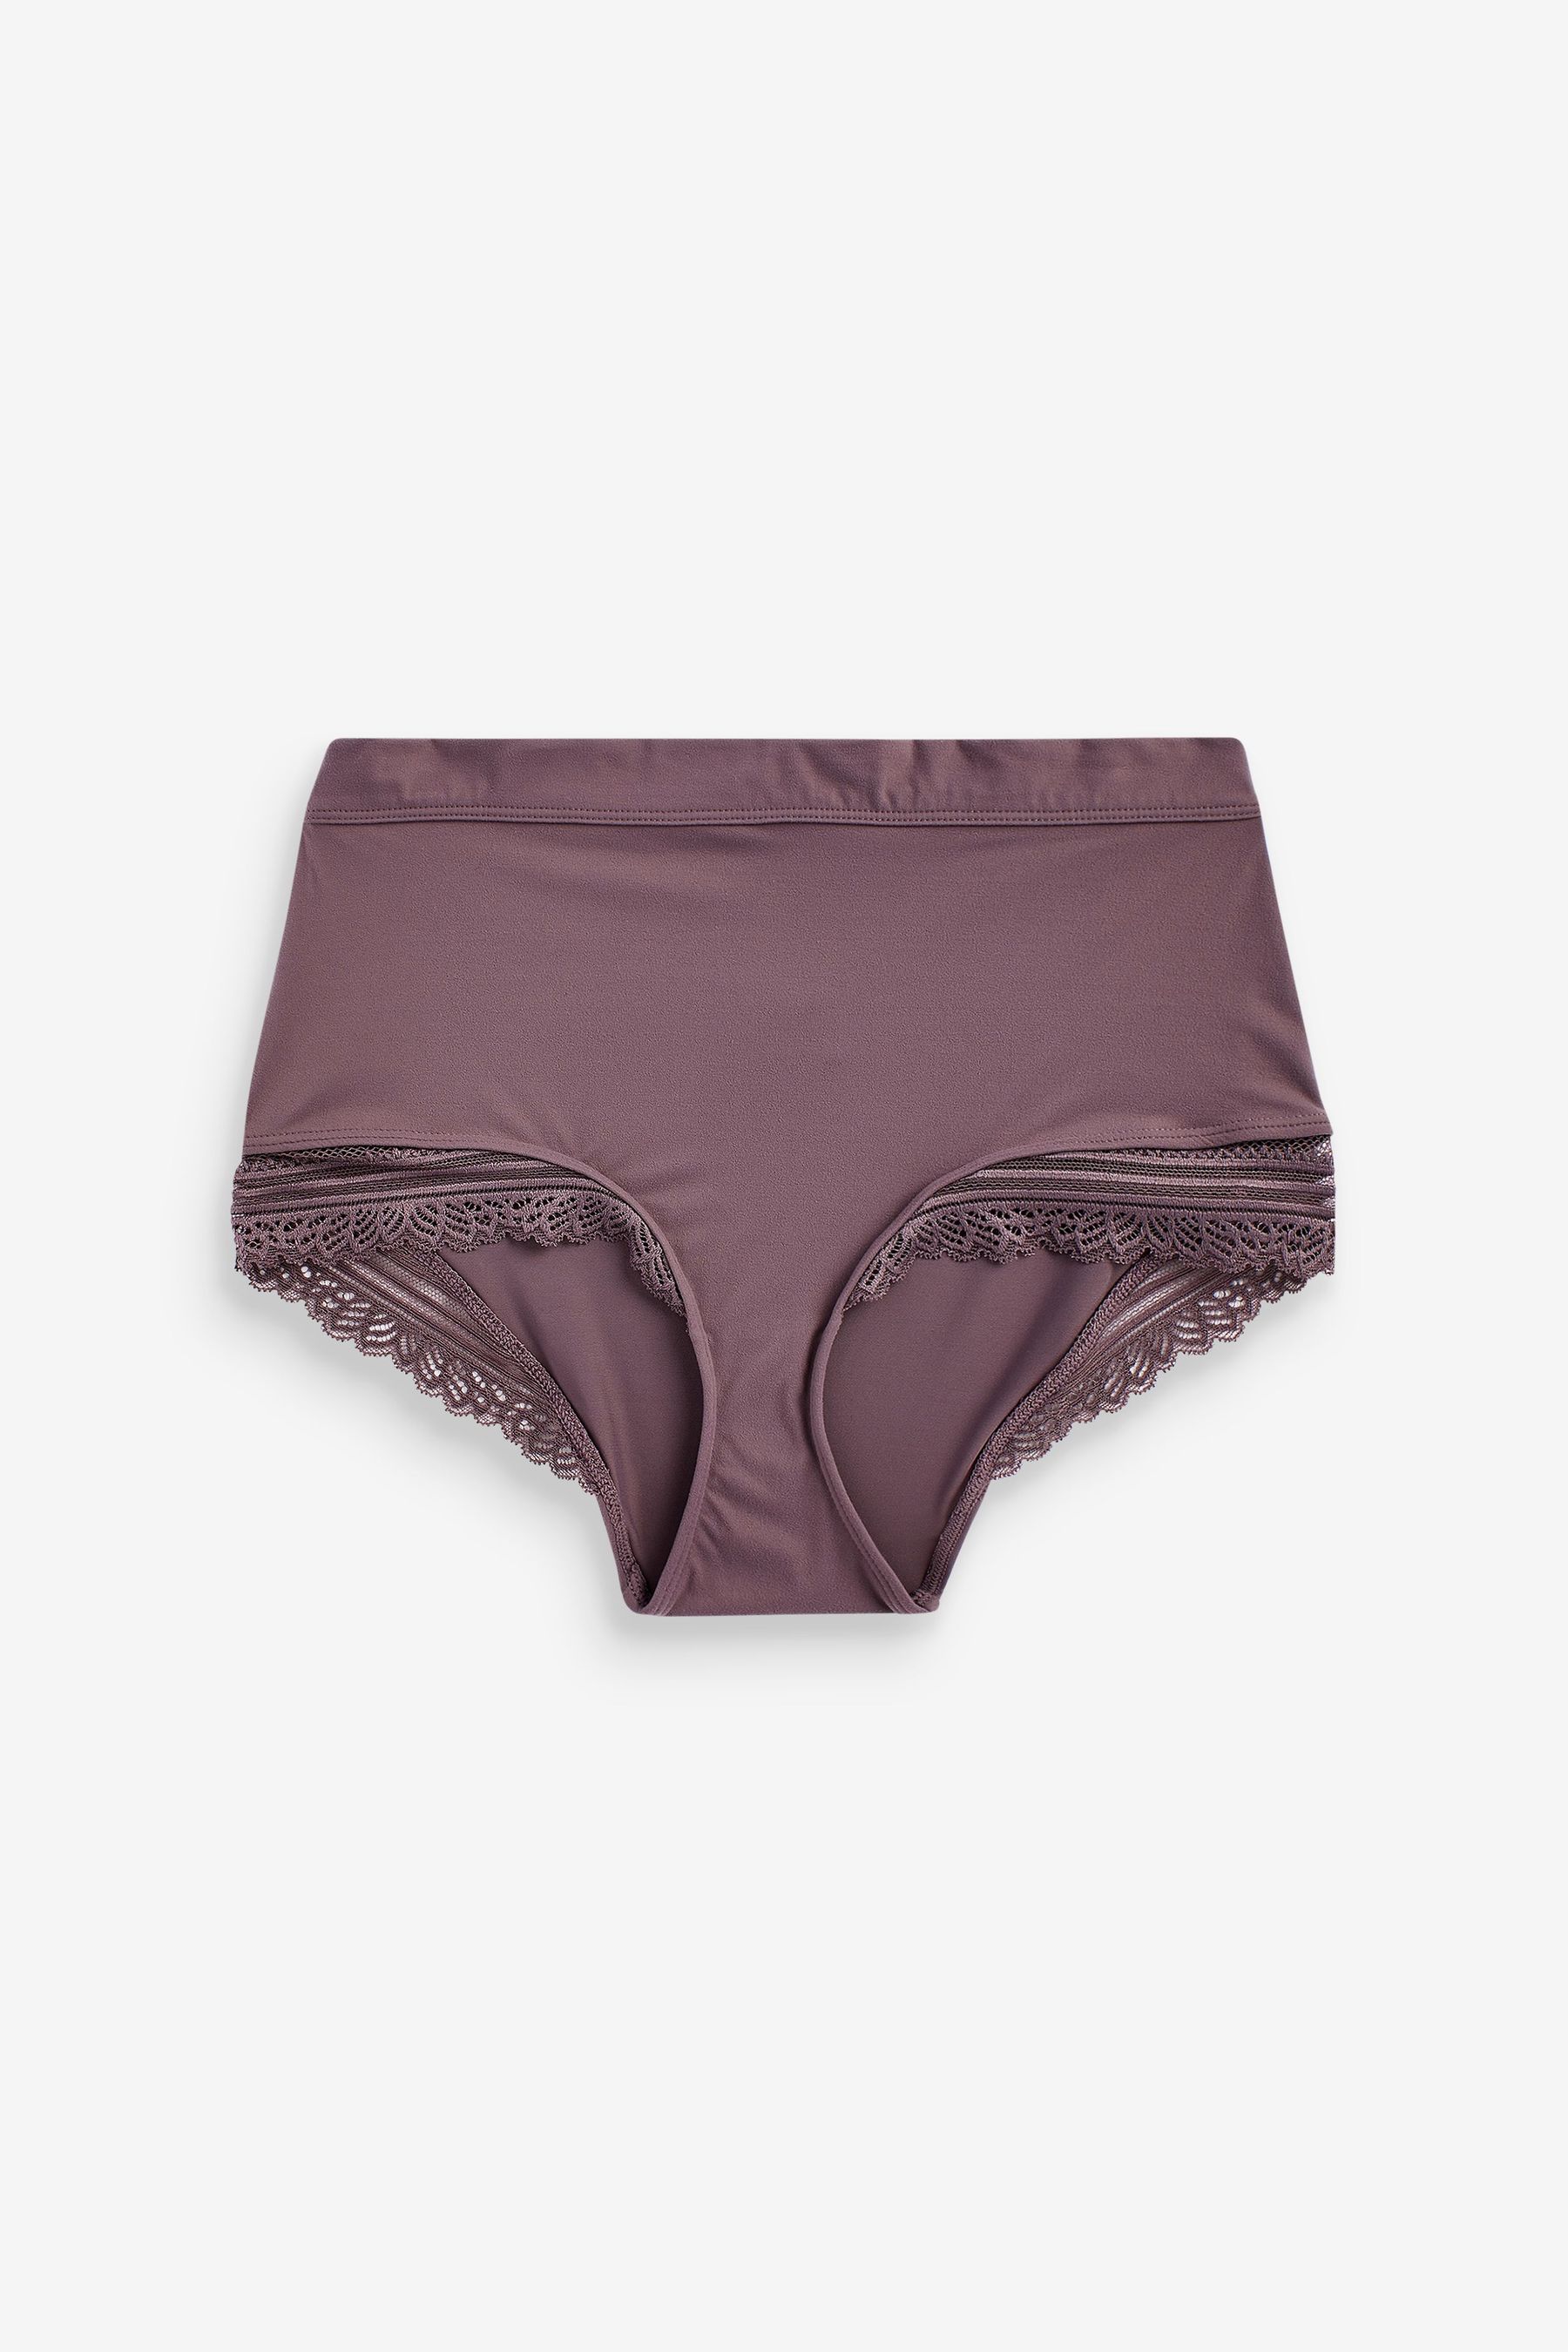 Forever Comfort® Knickers Full Brief